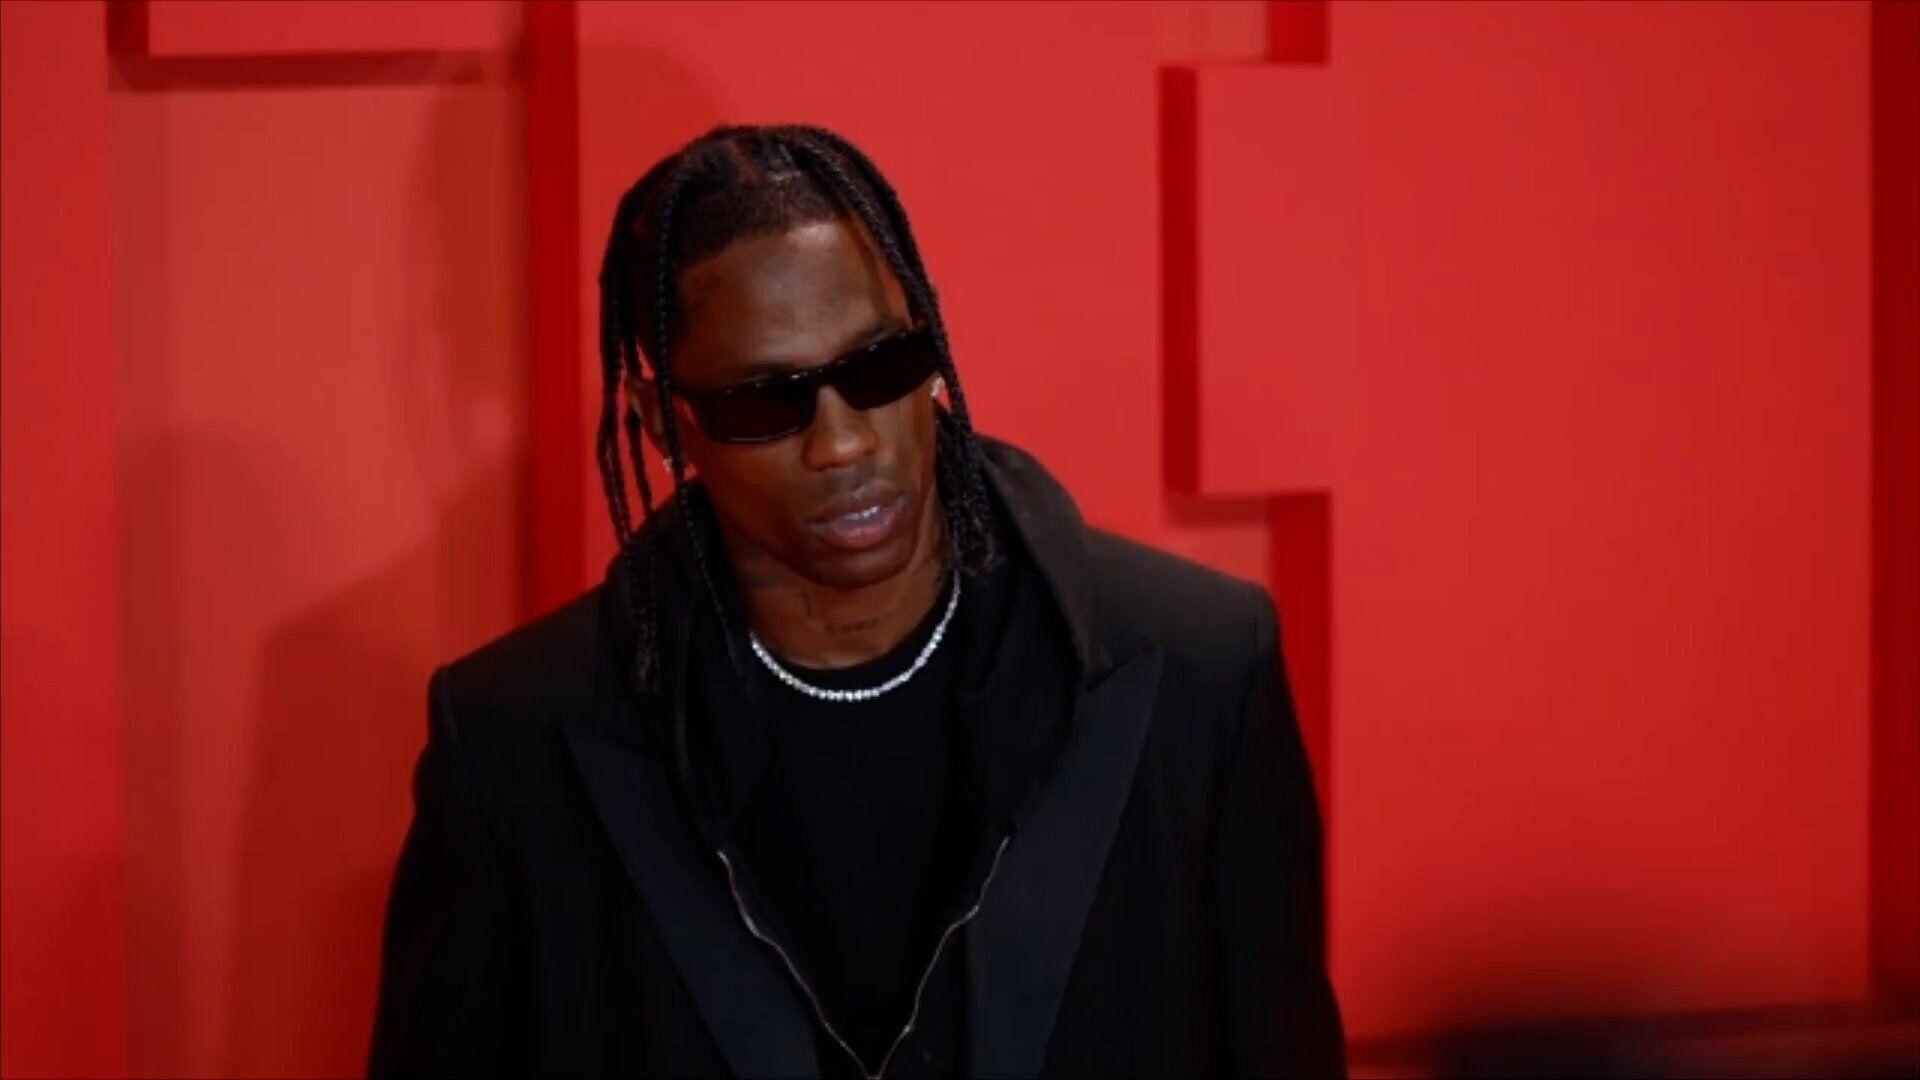 Rapper Travis Scott avoids charges over fatal crowd crush at his